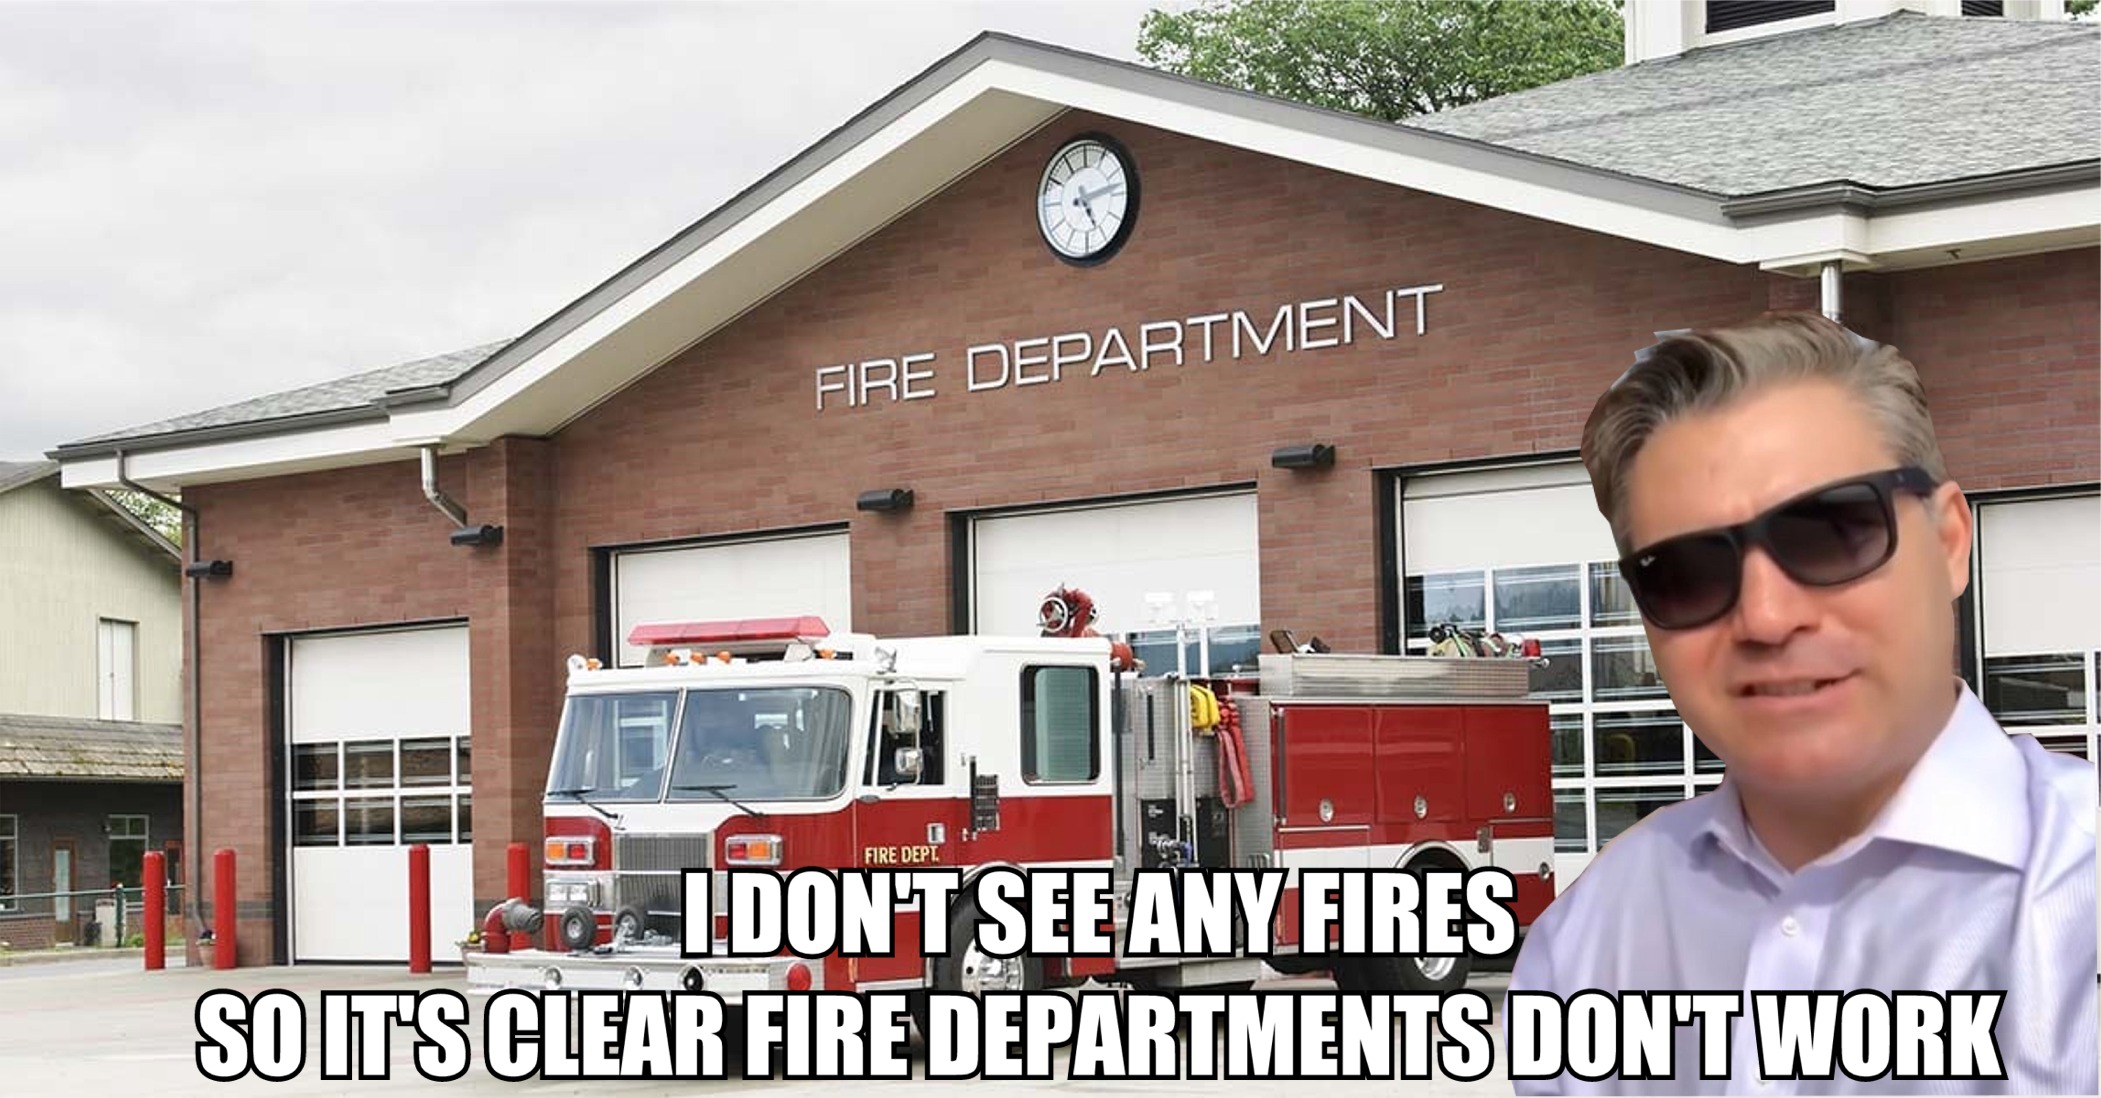 political meme fire department - Fire Department Idont See Any Fires So Its Clear Fire Departments Dont Work